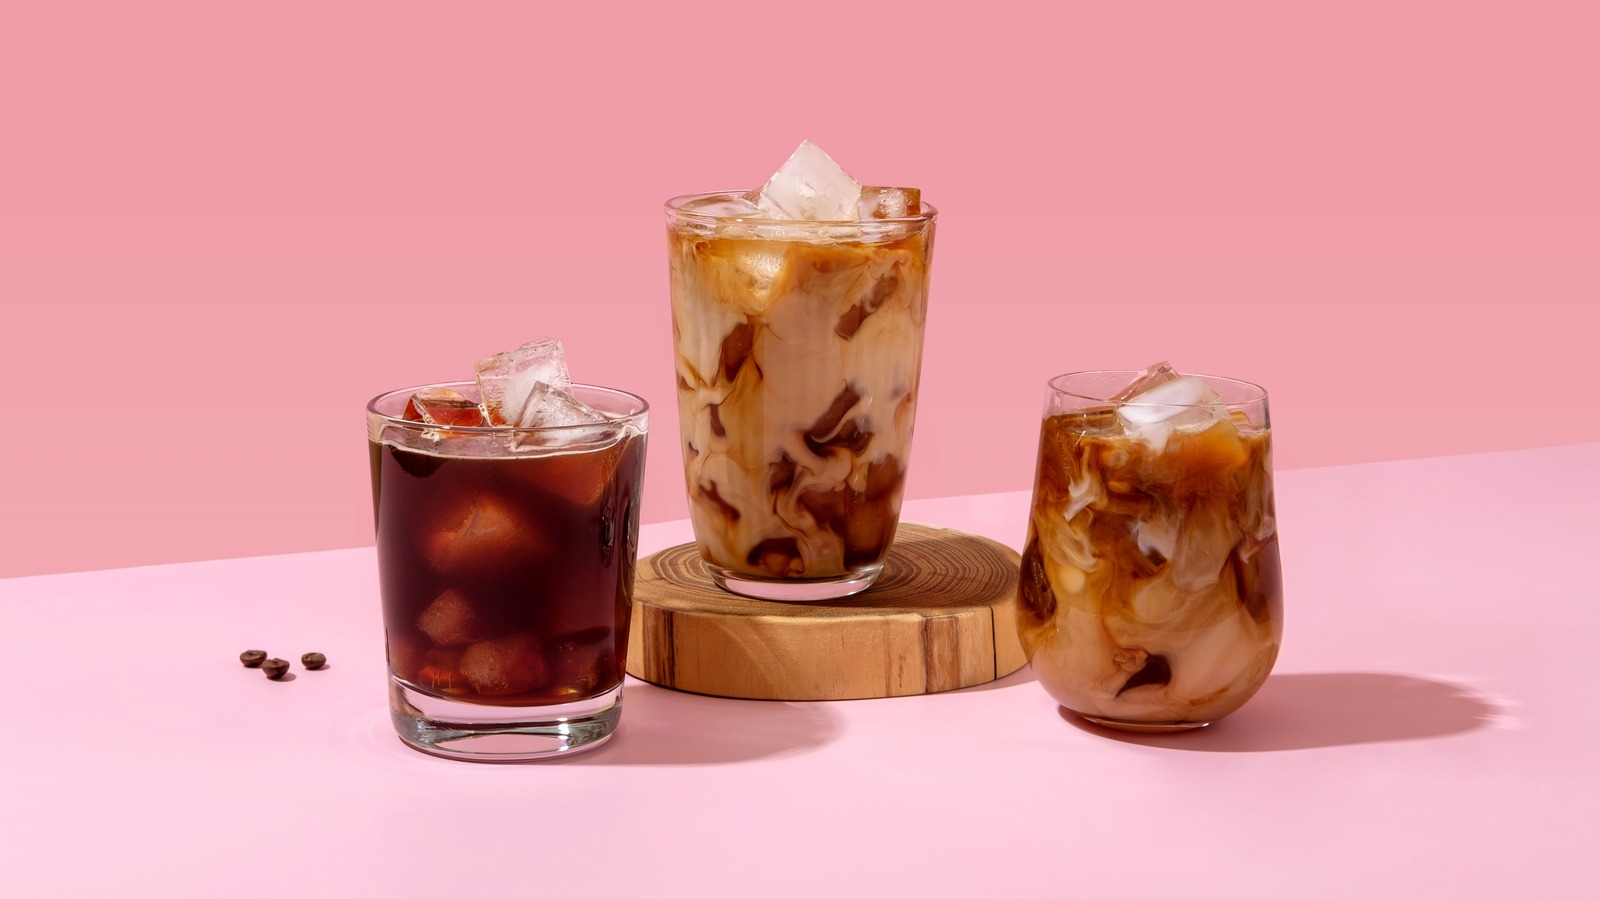 https://www.tastingtable.com/img/gallery/cold-brew-vs-nitro-cold-brew-whats-the-difference/l-intro-1670958220.jpg